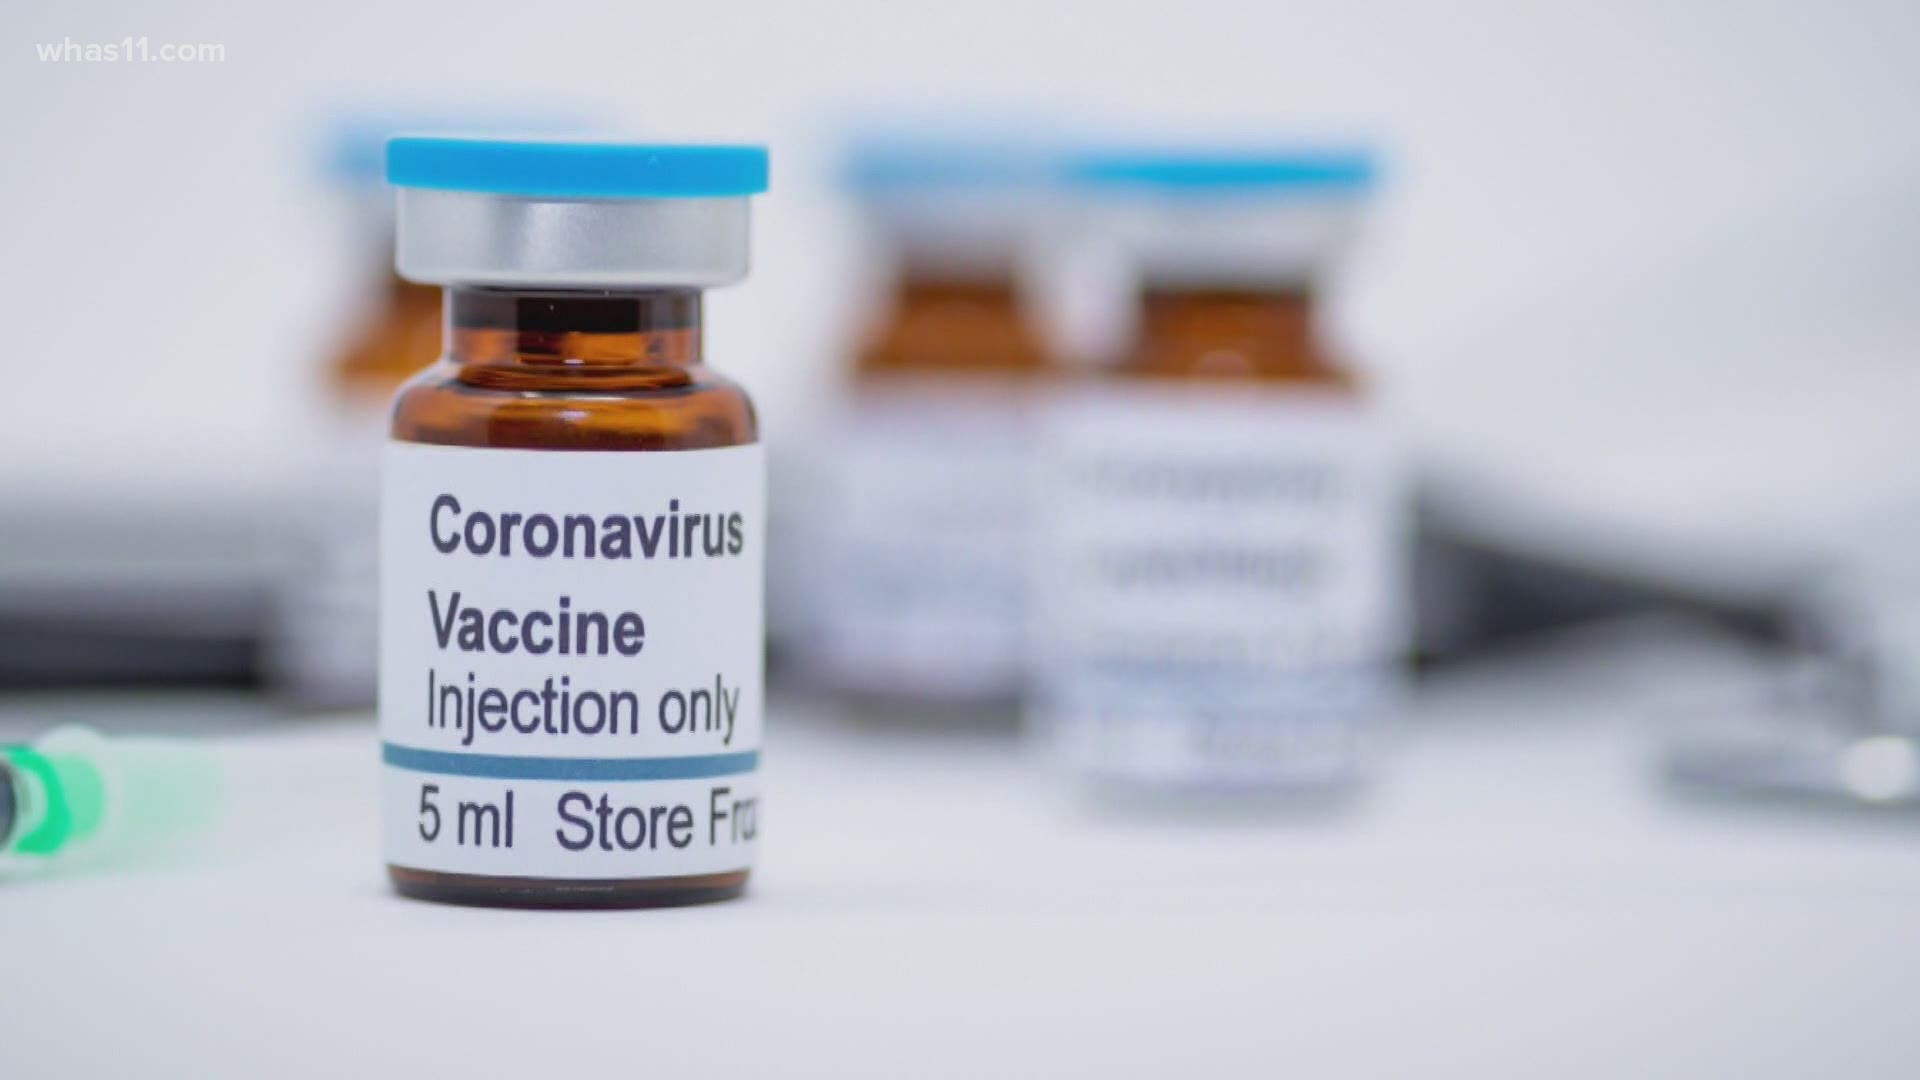 With the looming deadline of a fast-tracked FDA approval of a COVID-19 vaccine, the weight is being felt on distributors to get these vaccines to people in need.